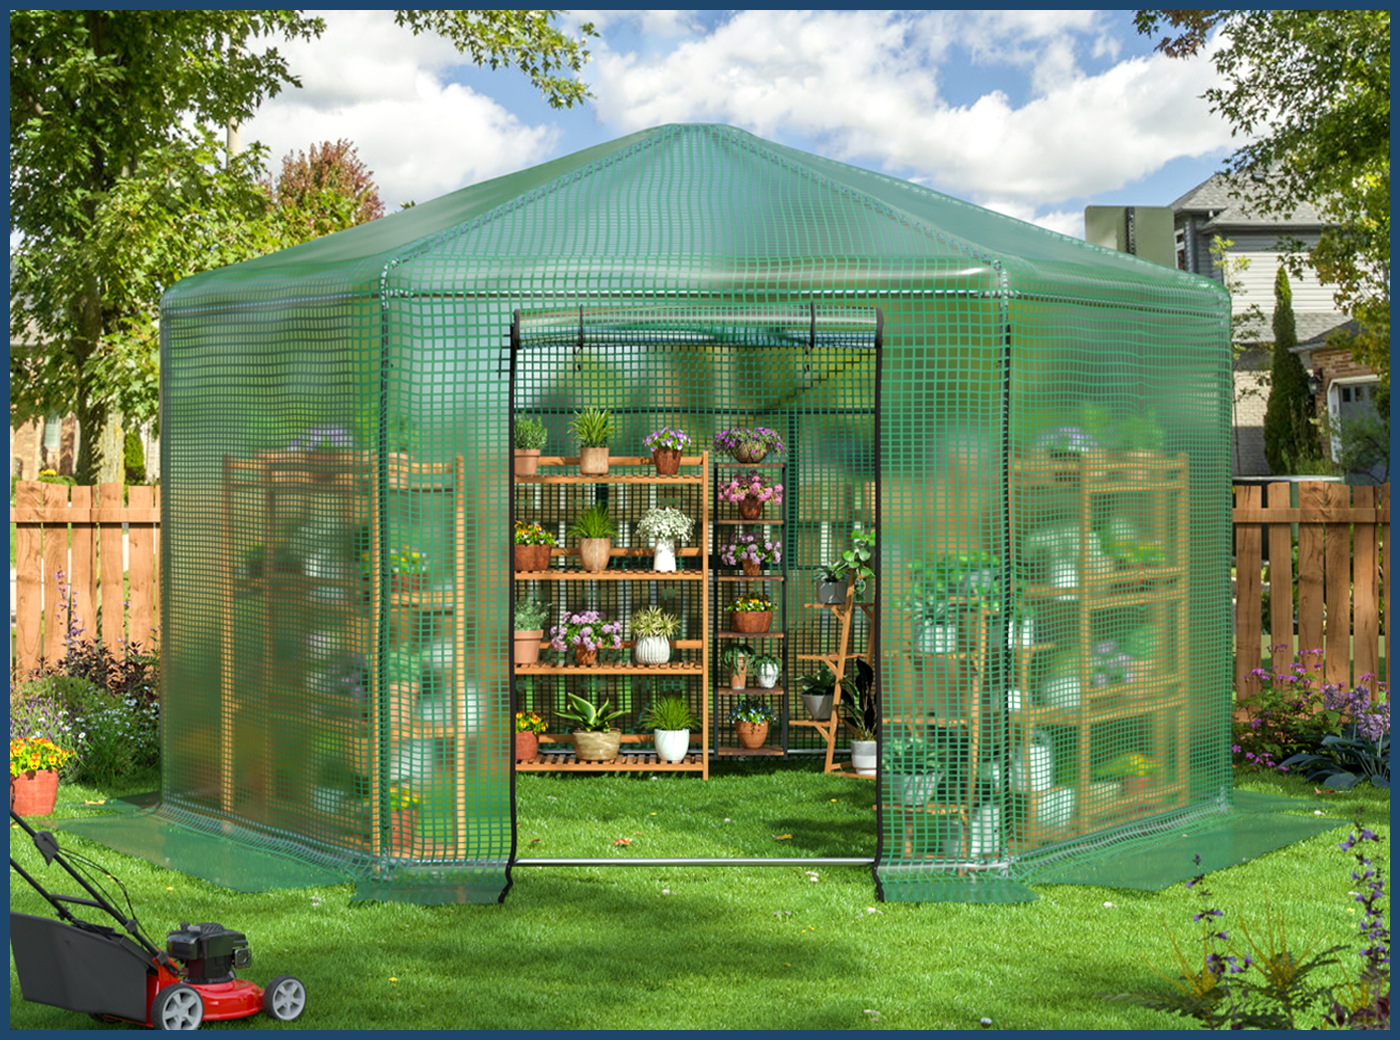 Outdoor green plant greenhouse, worry-free growth in all seasons